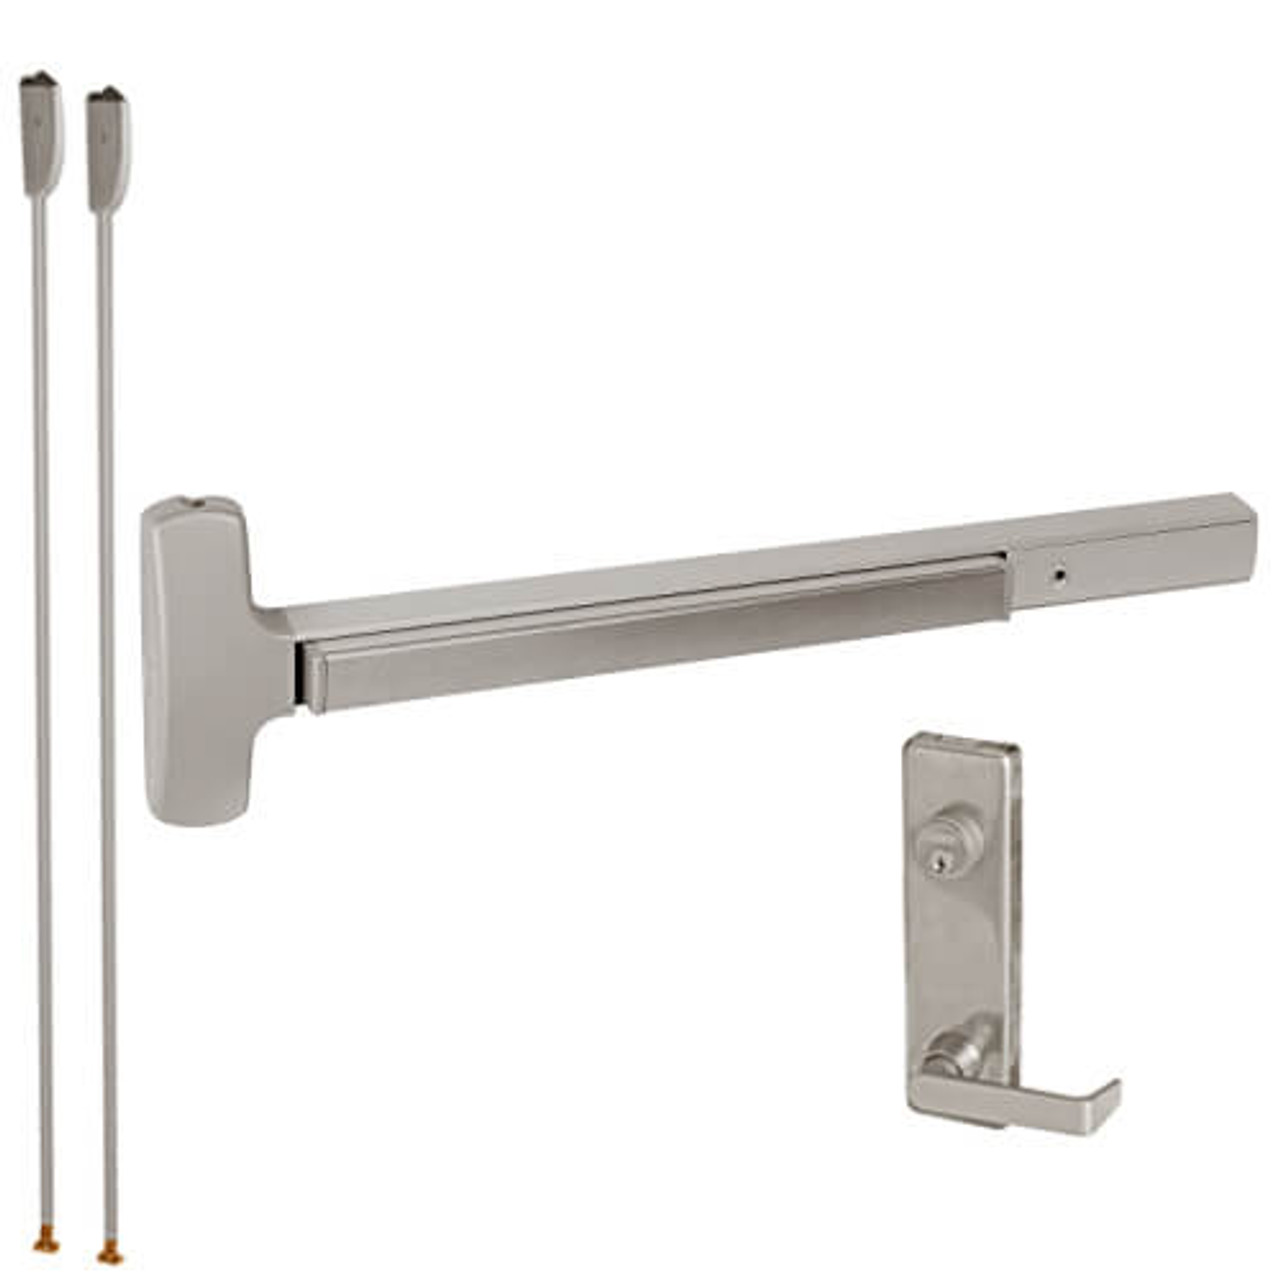 25-V-L-DANE-US32D-2-RHR Falcon Exit Device in Satin Stainless Steel